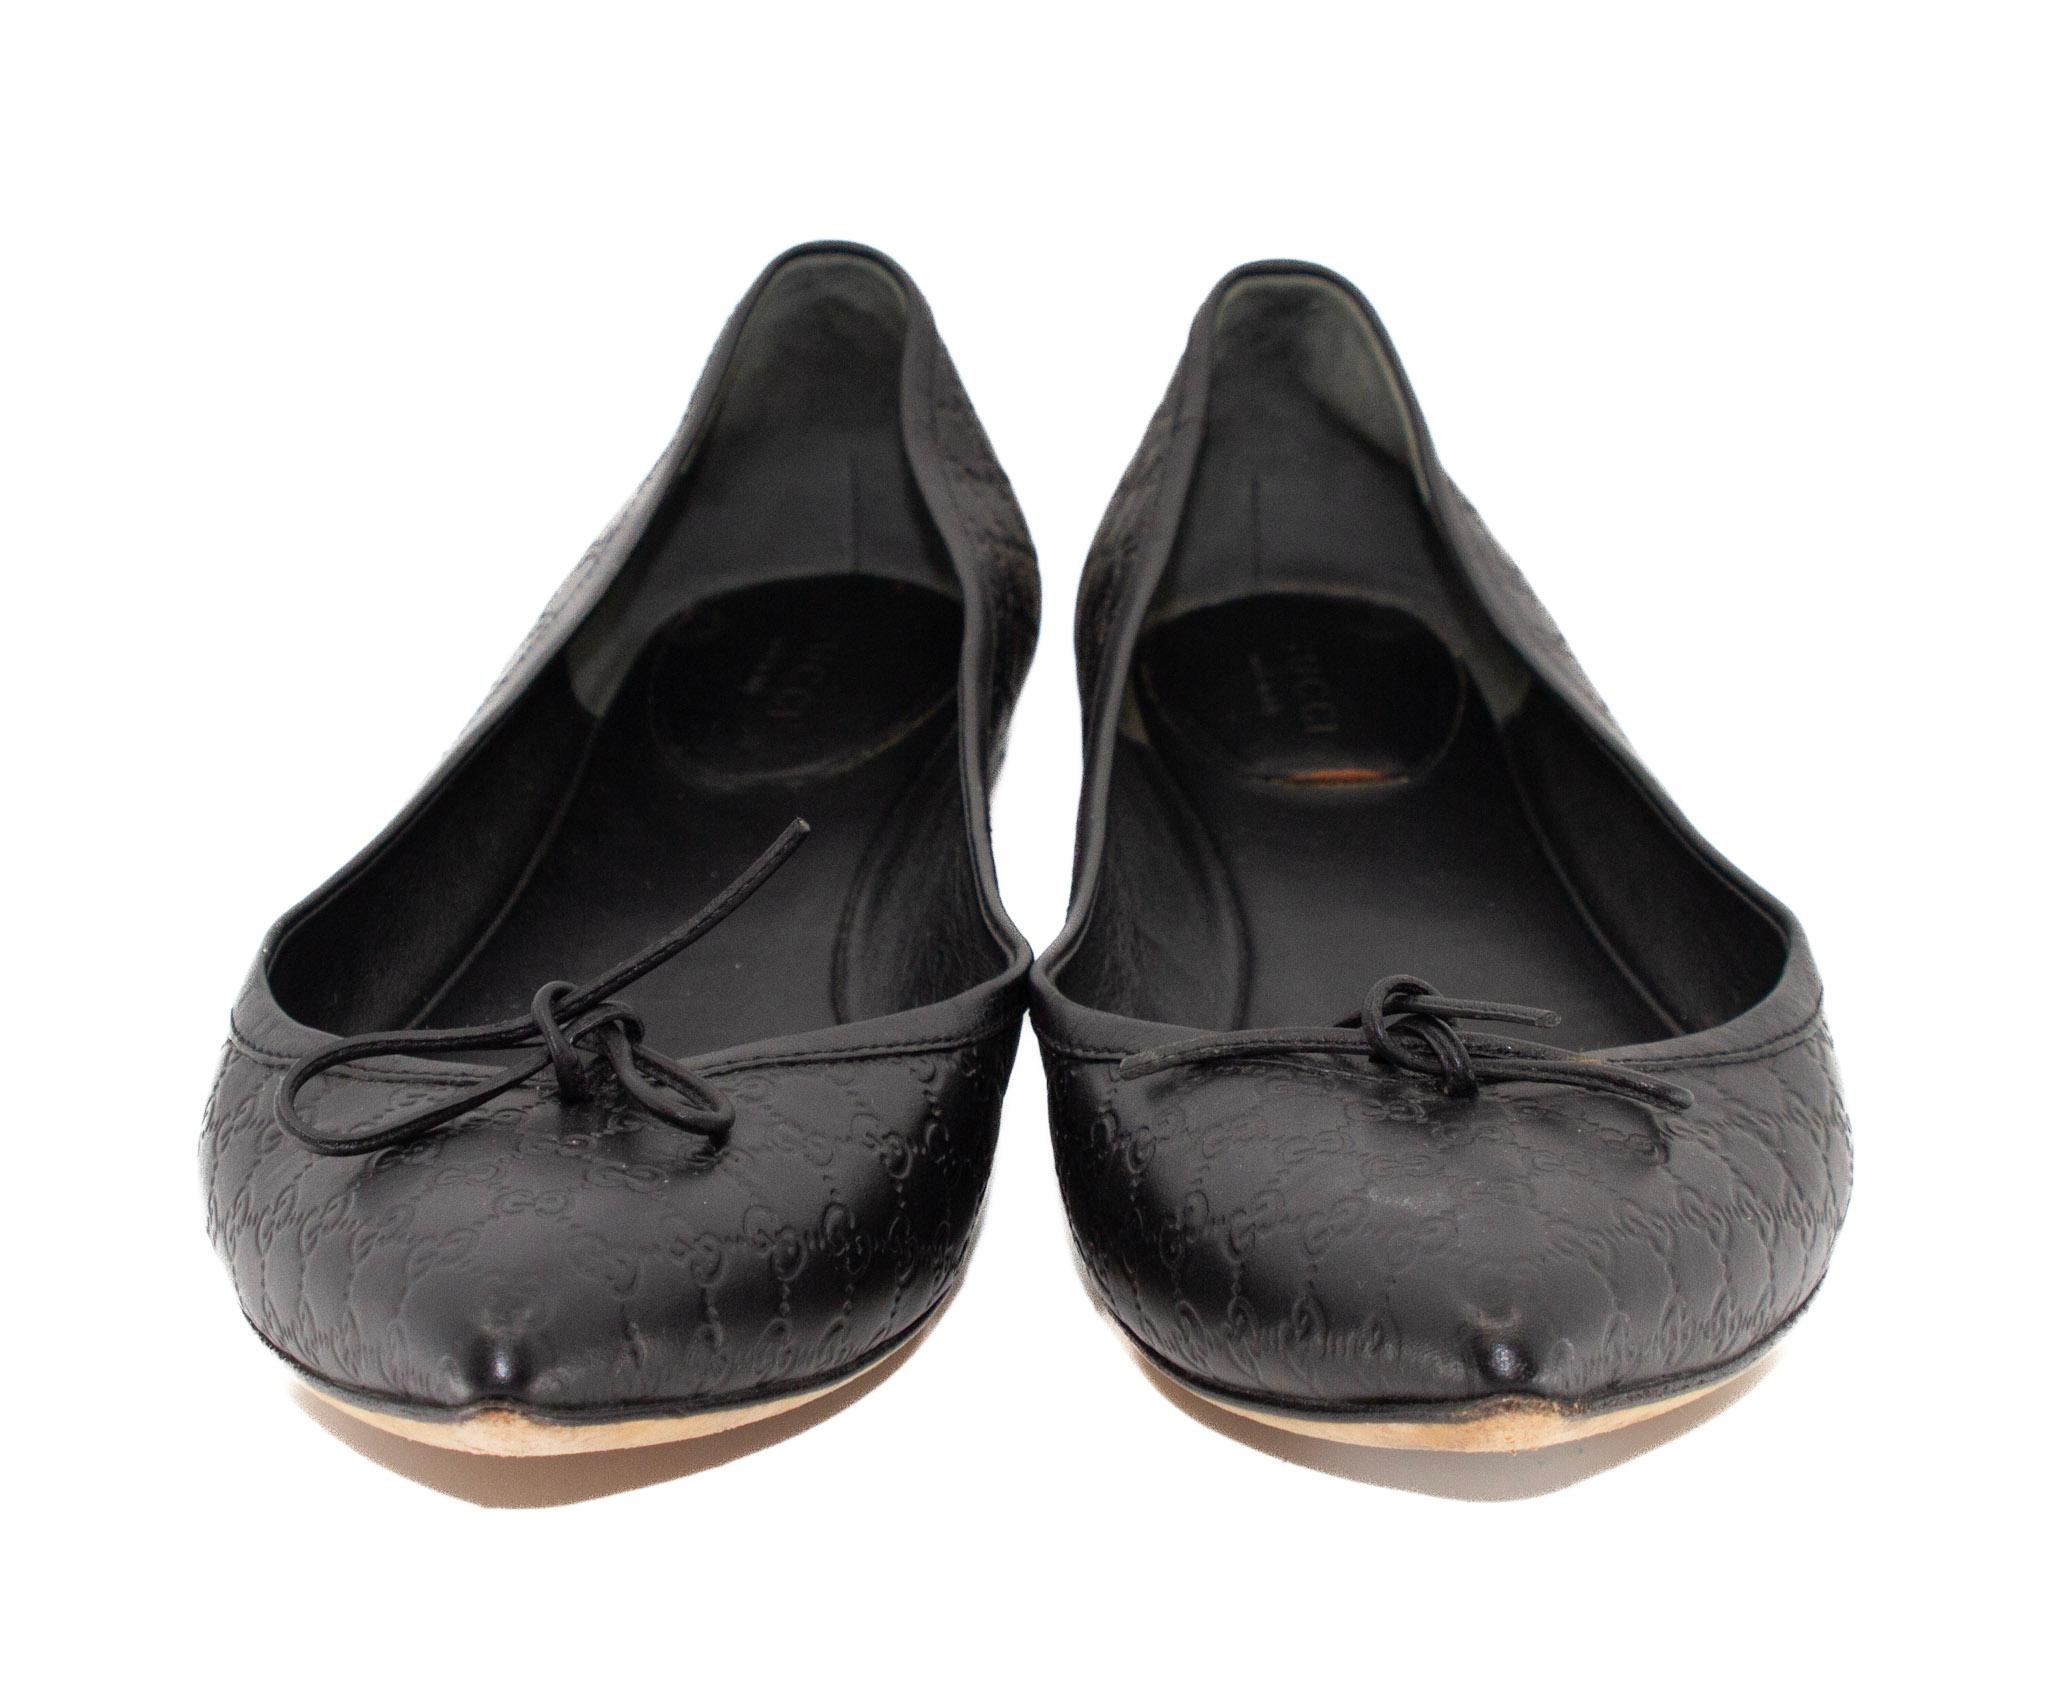 Gucci black ballerina flats In Excellent Condition For Sale In Kingston, NY